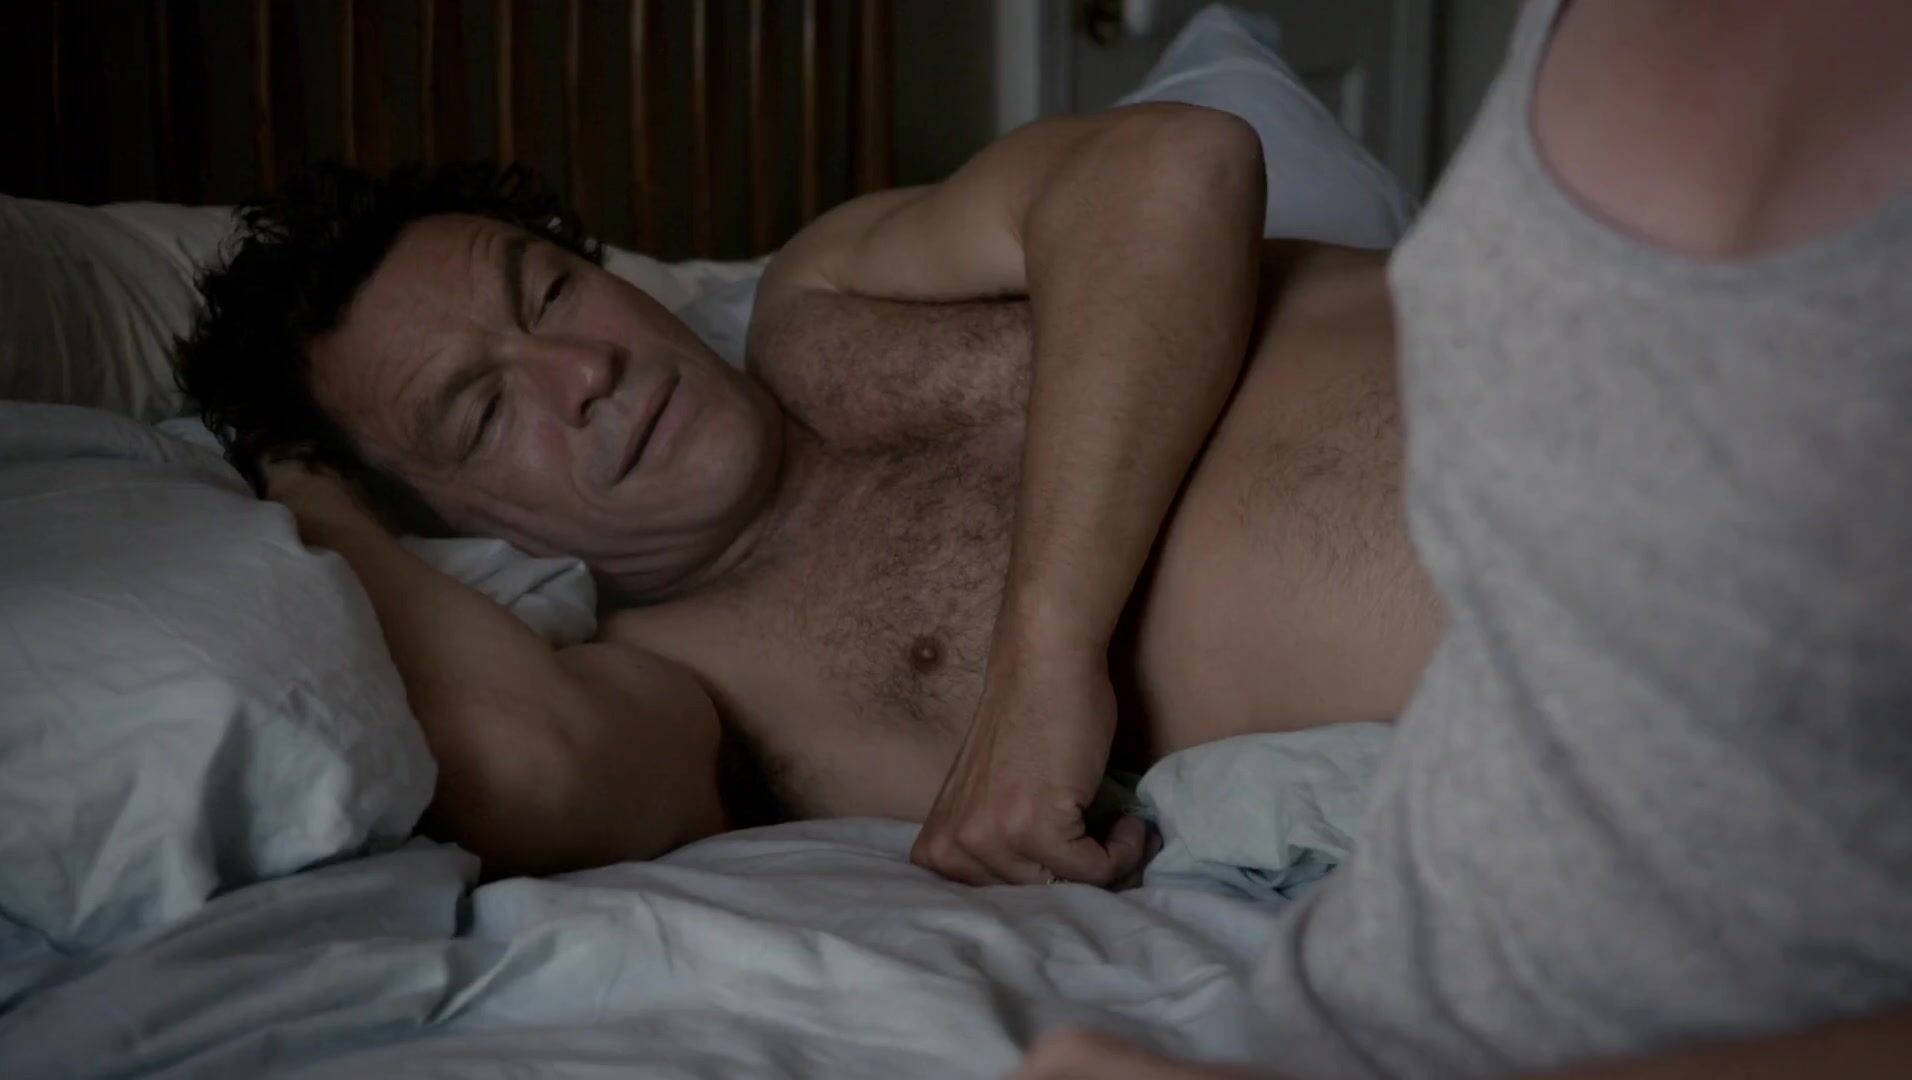 NoveltyExpo Maura Tierney allows man to try her peach and fuck it in series Affair S01e01 (2014) Gang